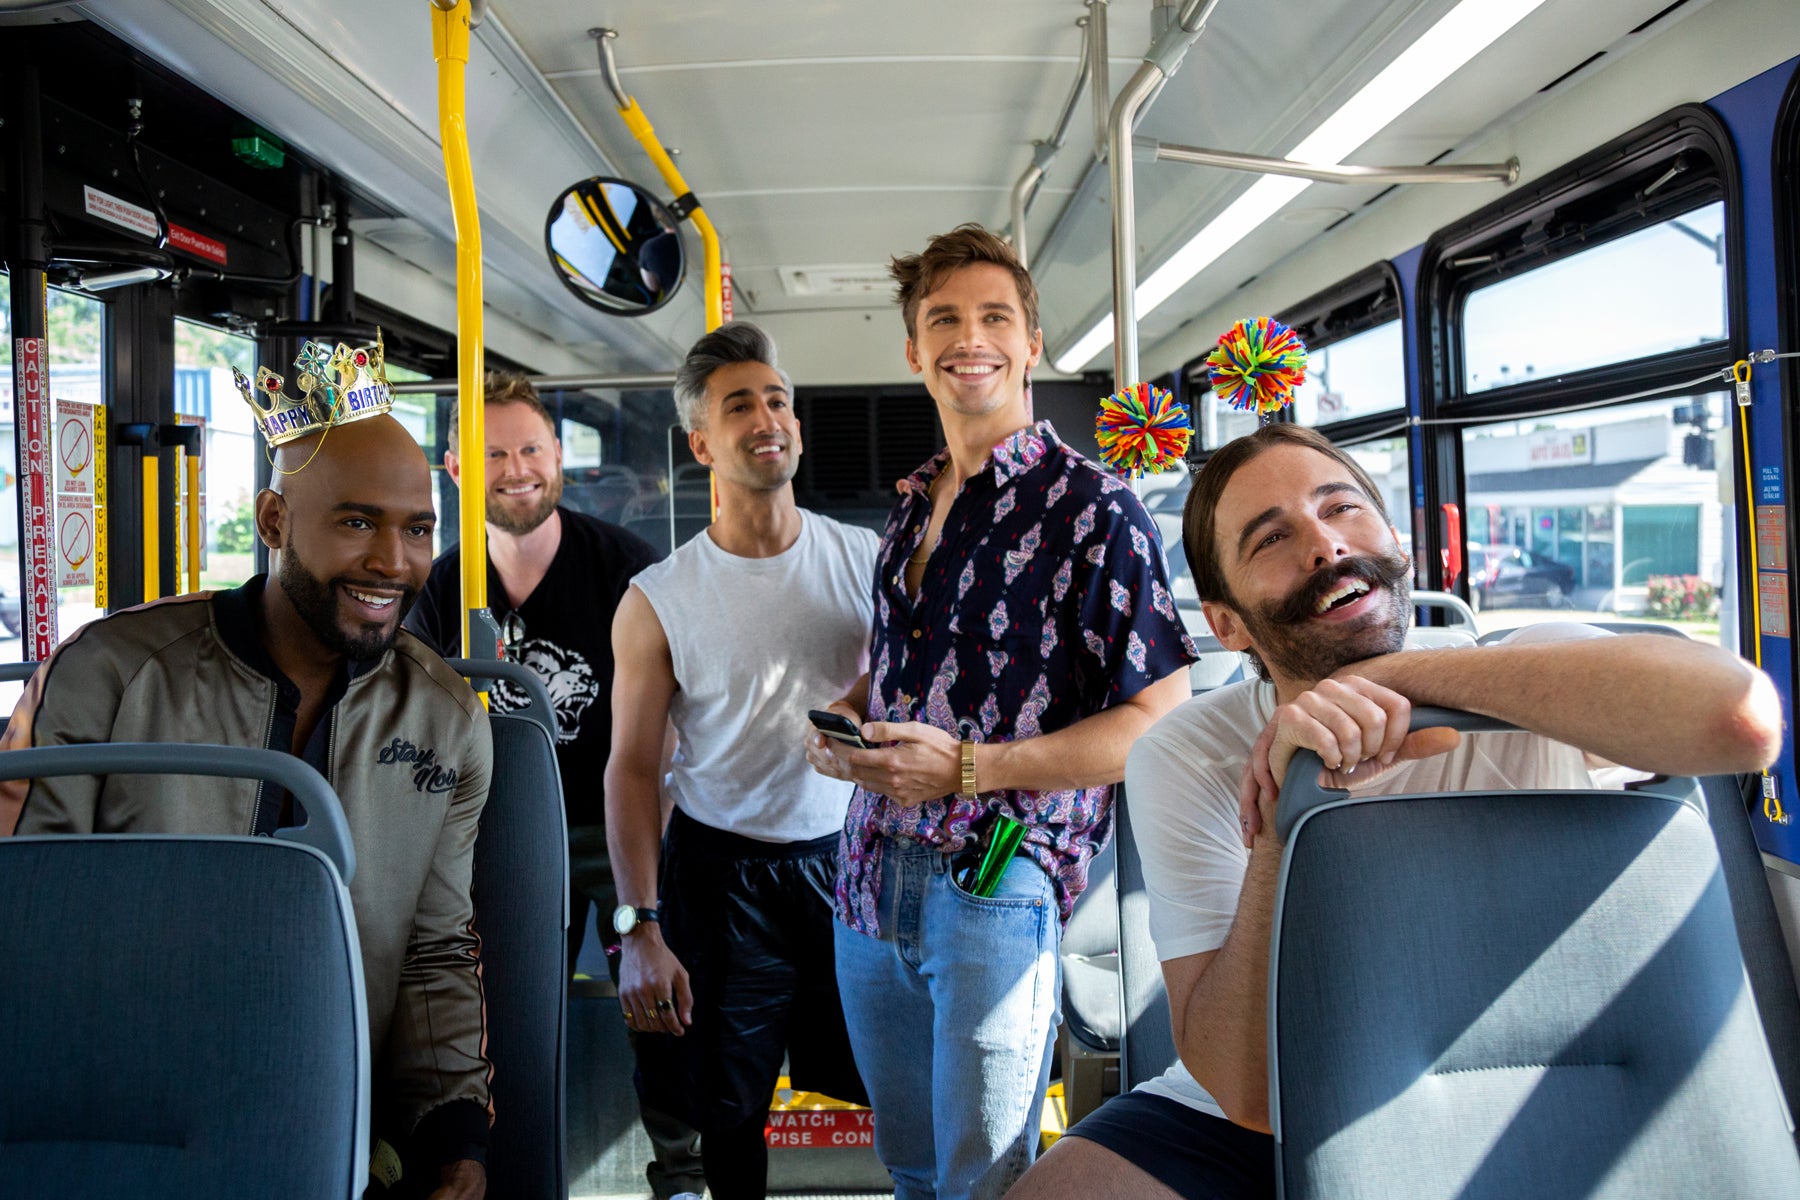 Karamo, Bobby, Tan, Antoni, and Jonathan stand on a public bus, looking off camera in an episode of Queer Eye.